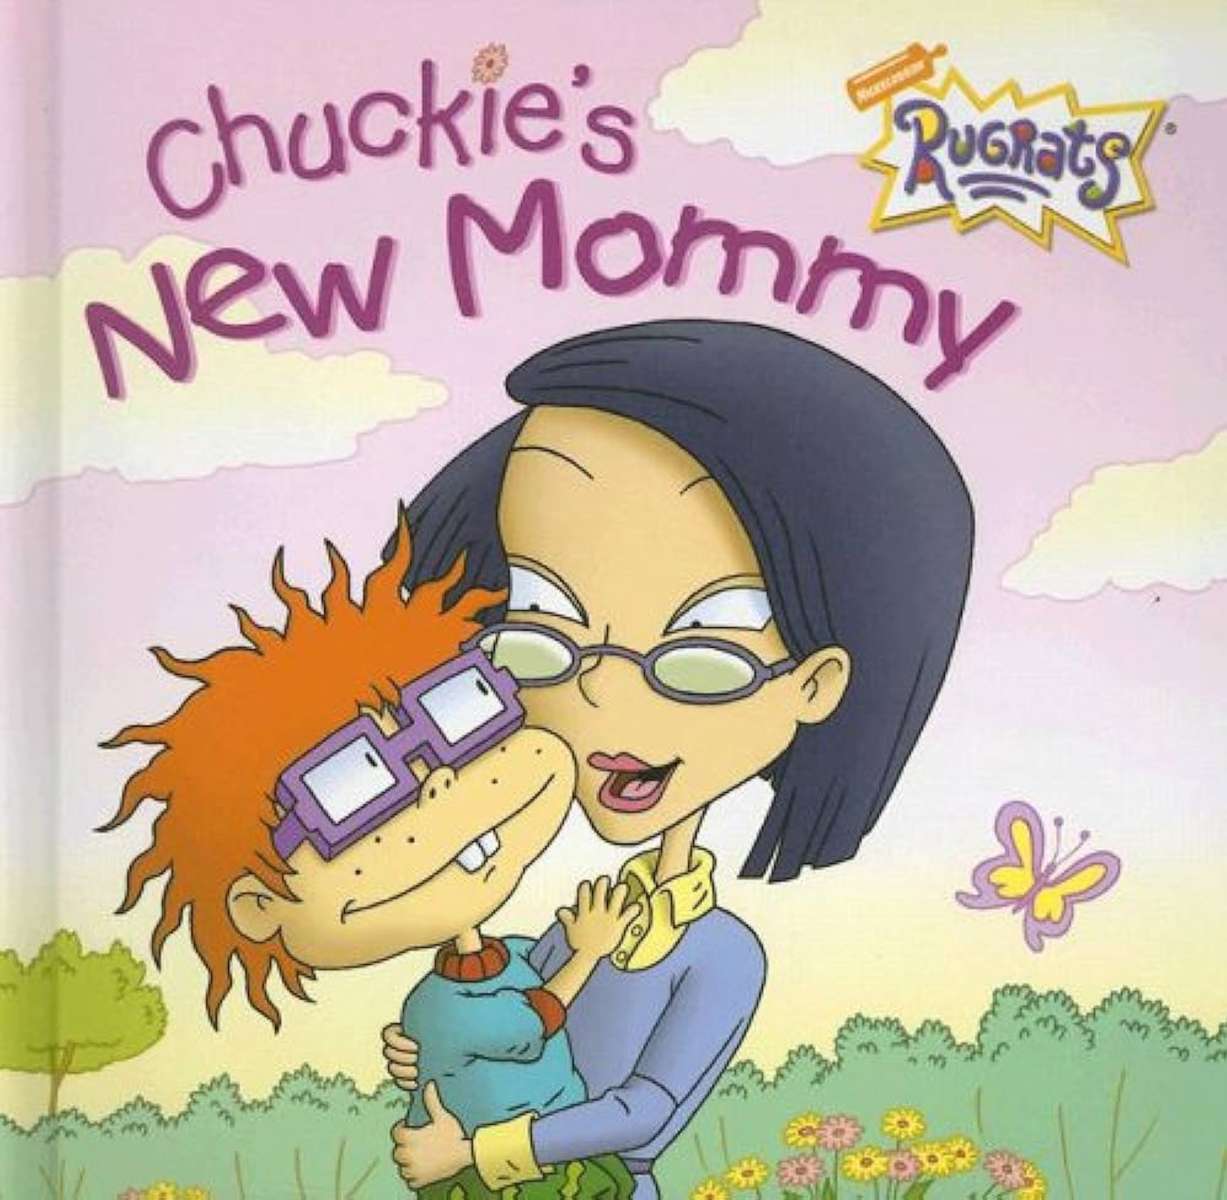 Chuckie’s New Mommy (Rugrats) jigsaw puzzle online